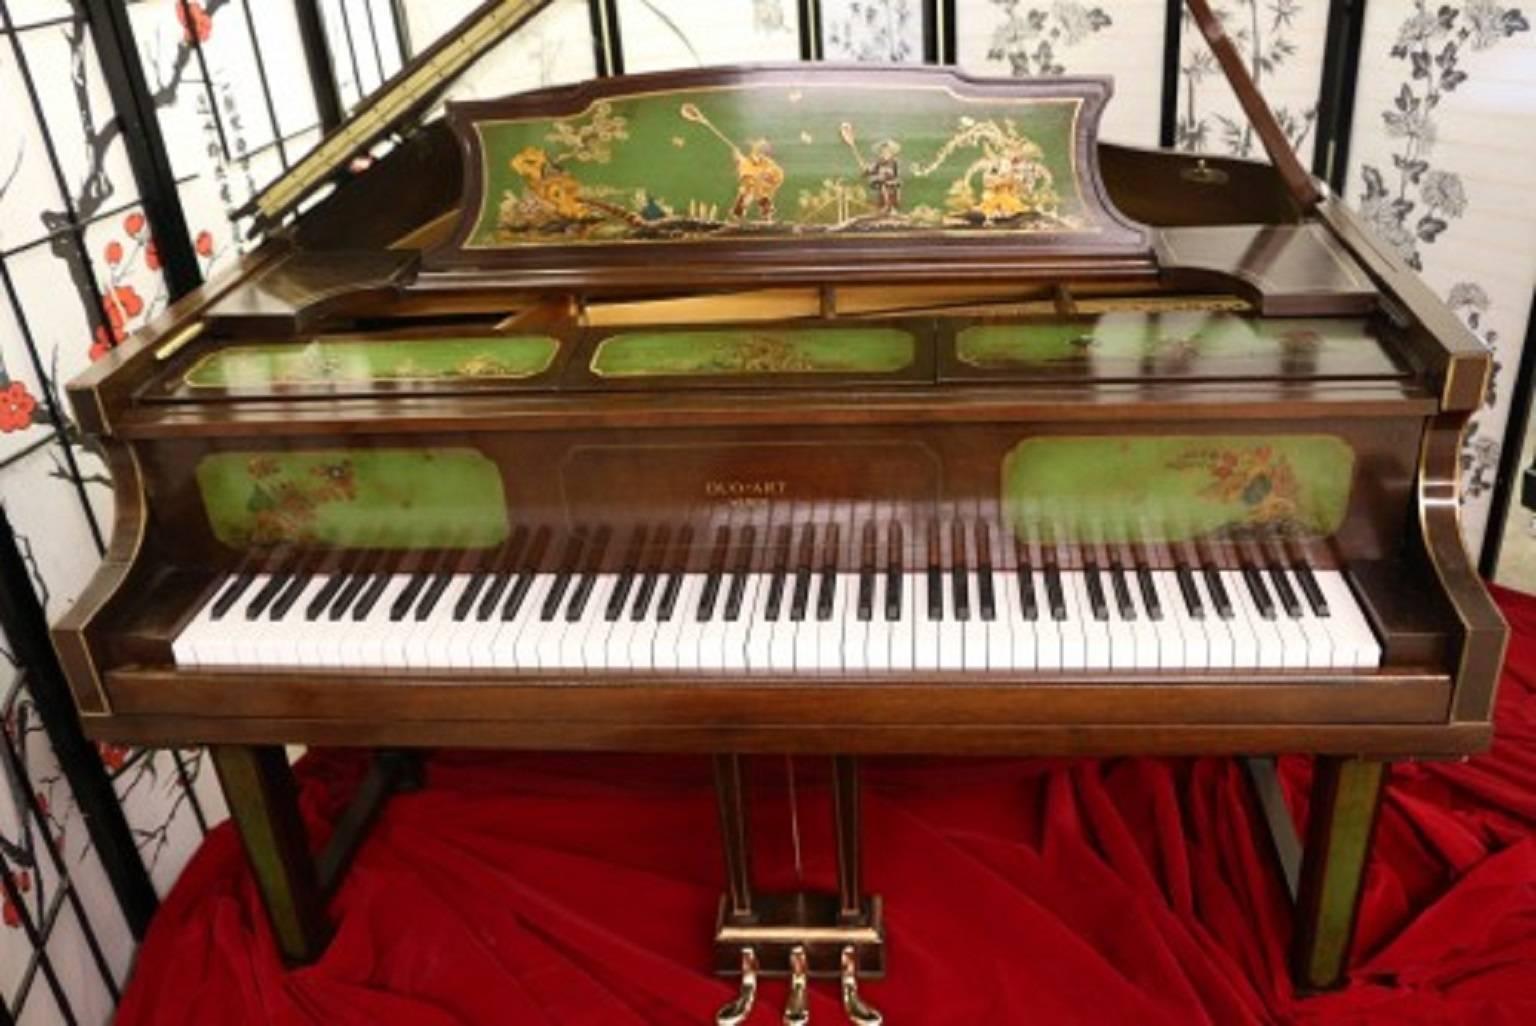 See and hear more about this magnificent piano on the VIDEO at the bottom of Sonny's Luxury Art Case Piano storefront homepage. 

Beautiful hand-painted 